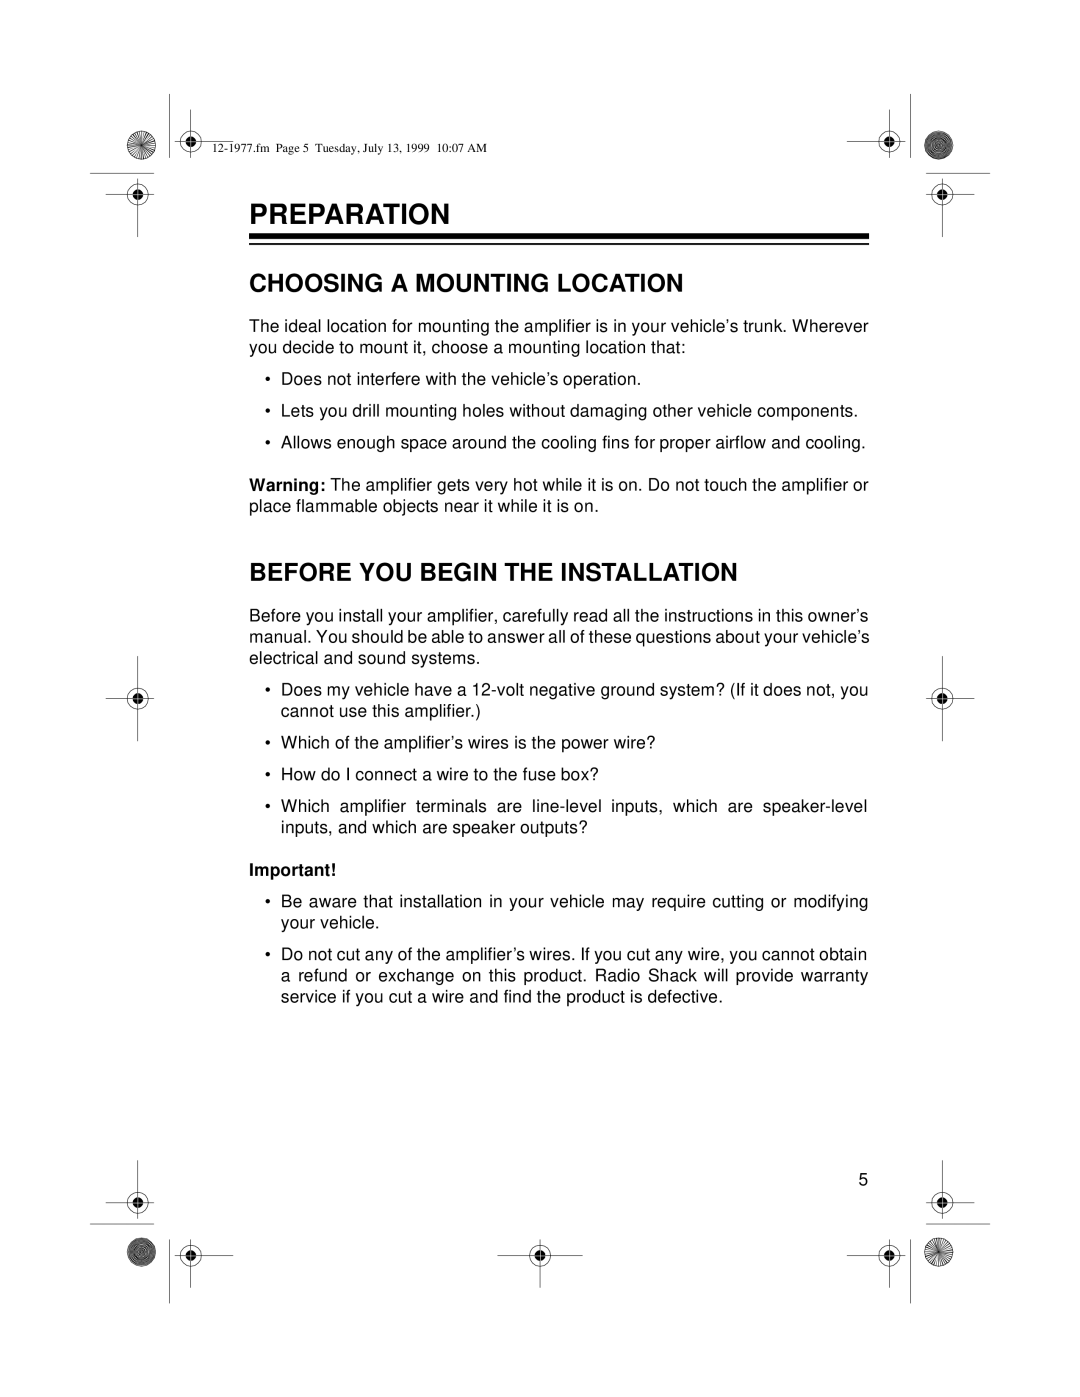 Radio Shack 85 owner manual Preparation, Choosing A Mounting Location, Before You Begin The Installation 